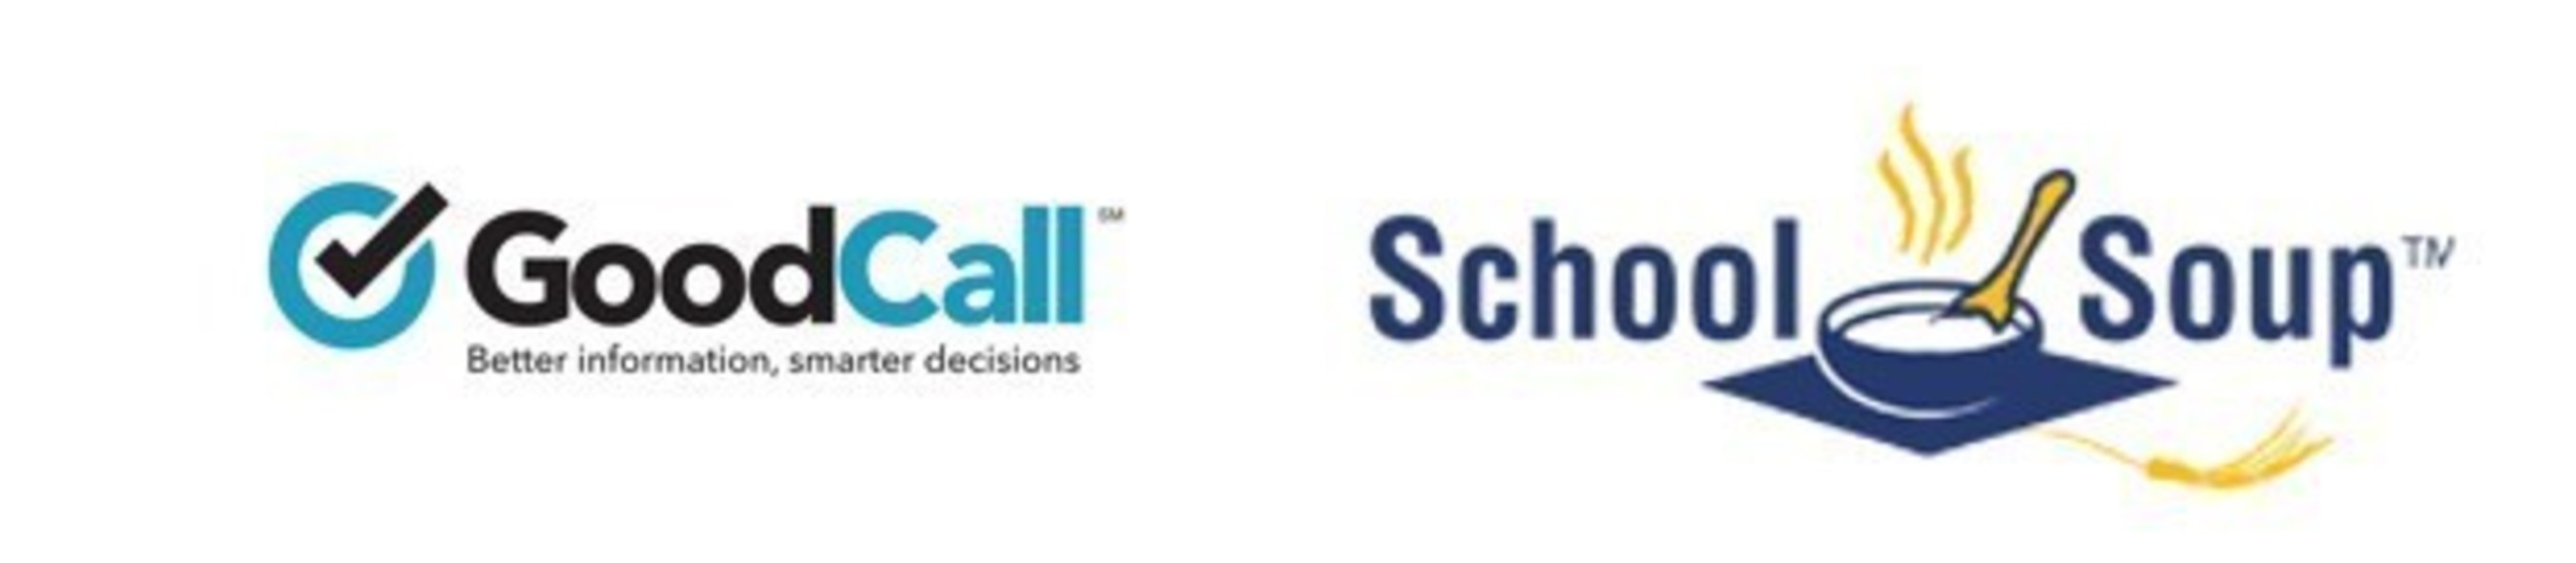 Charlotte Startup, GoodCall, Expands Scholarship Search Engine Offering Through Acquisition of SchoolSoup.com